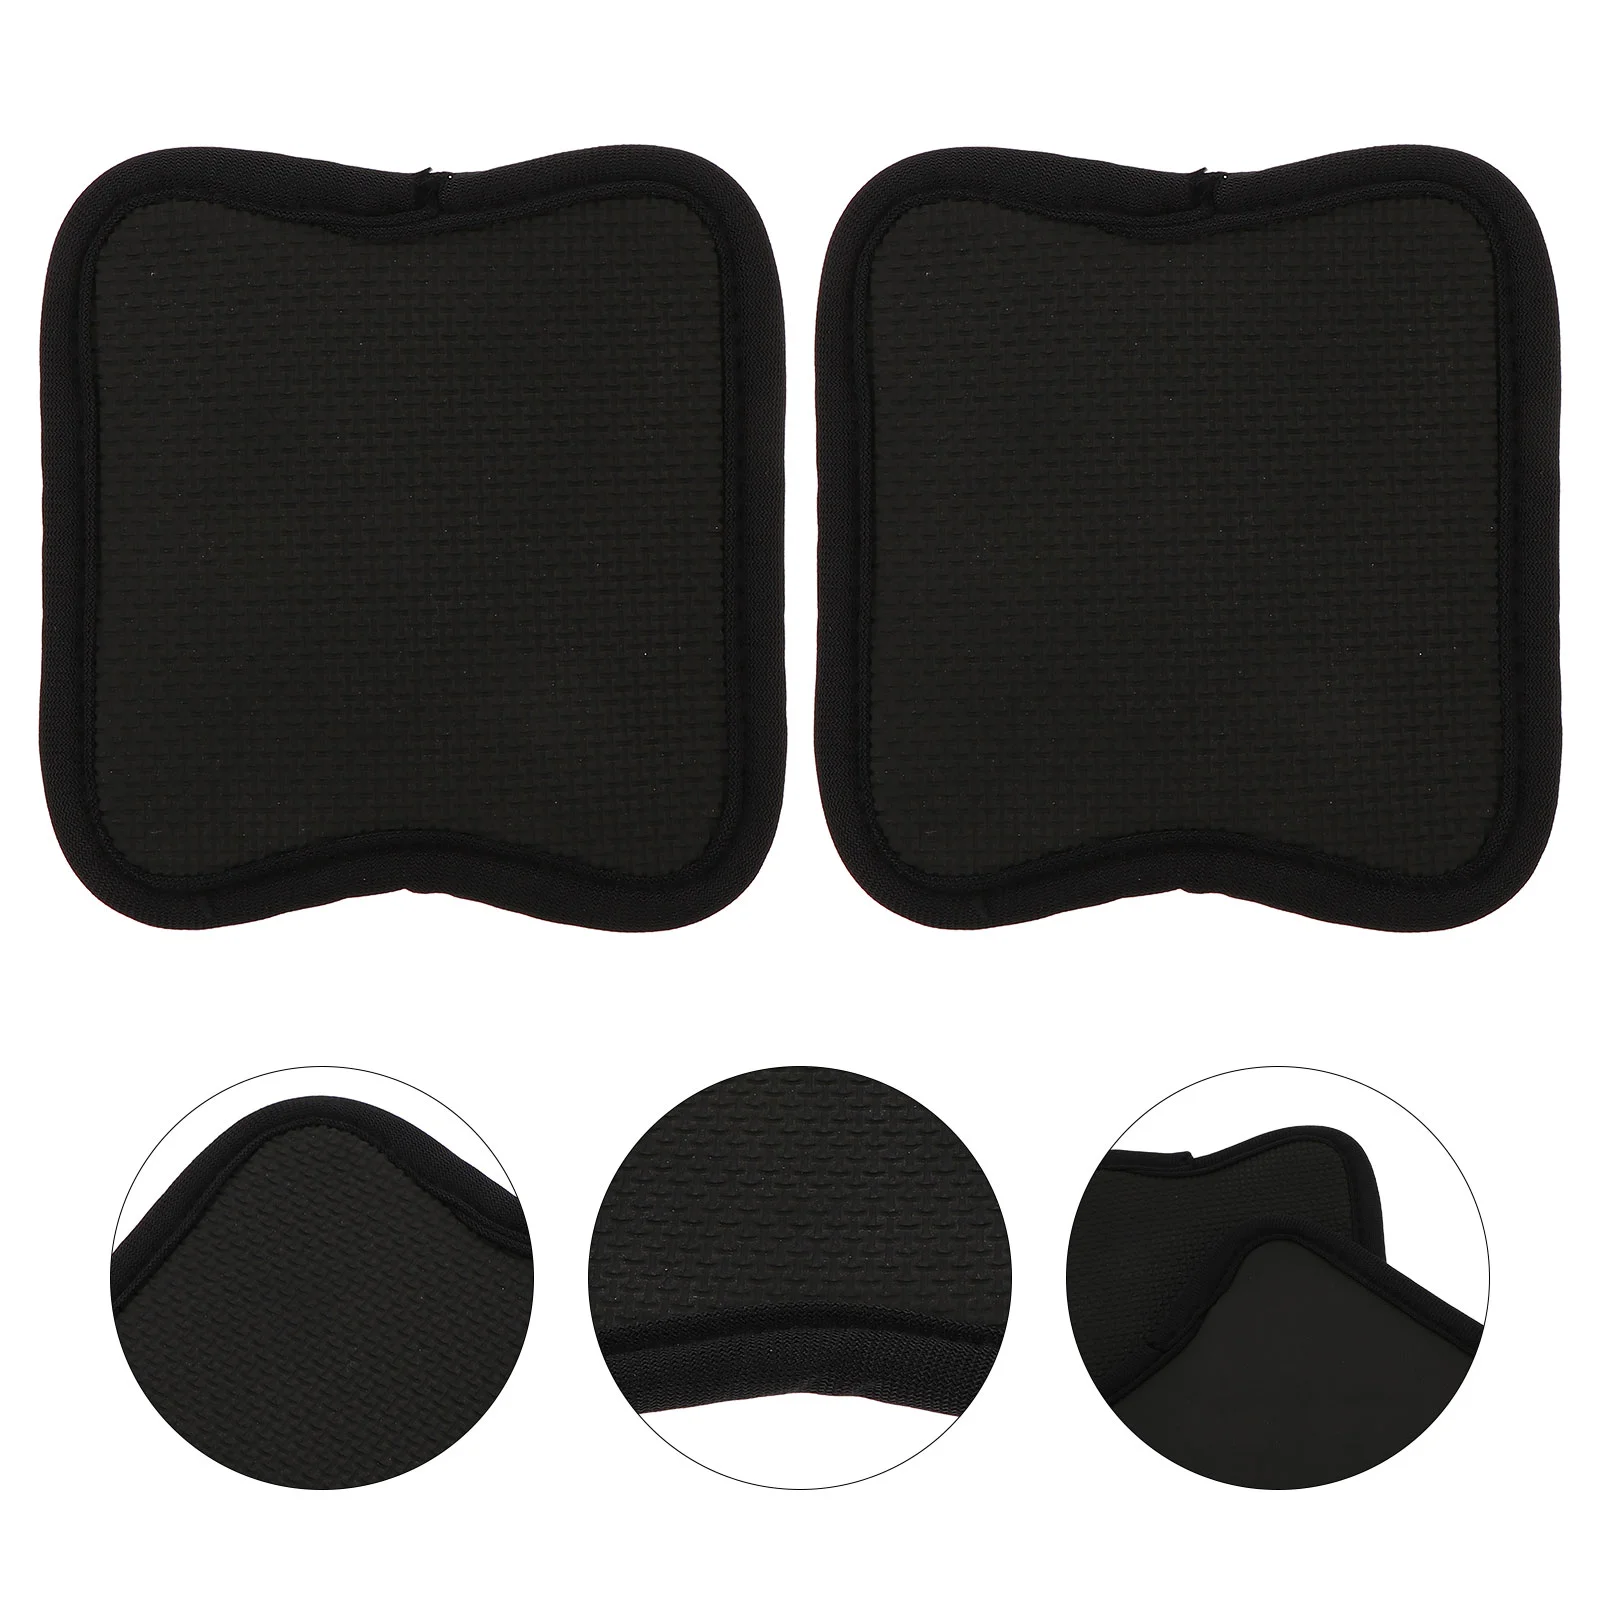 

1 Pair Workout Hand Pad Weight-Lifting Gym Training Anti-Slips Bare Hand Grip Pad